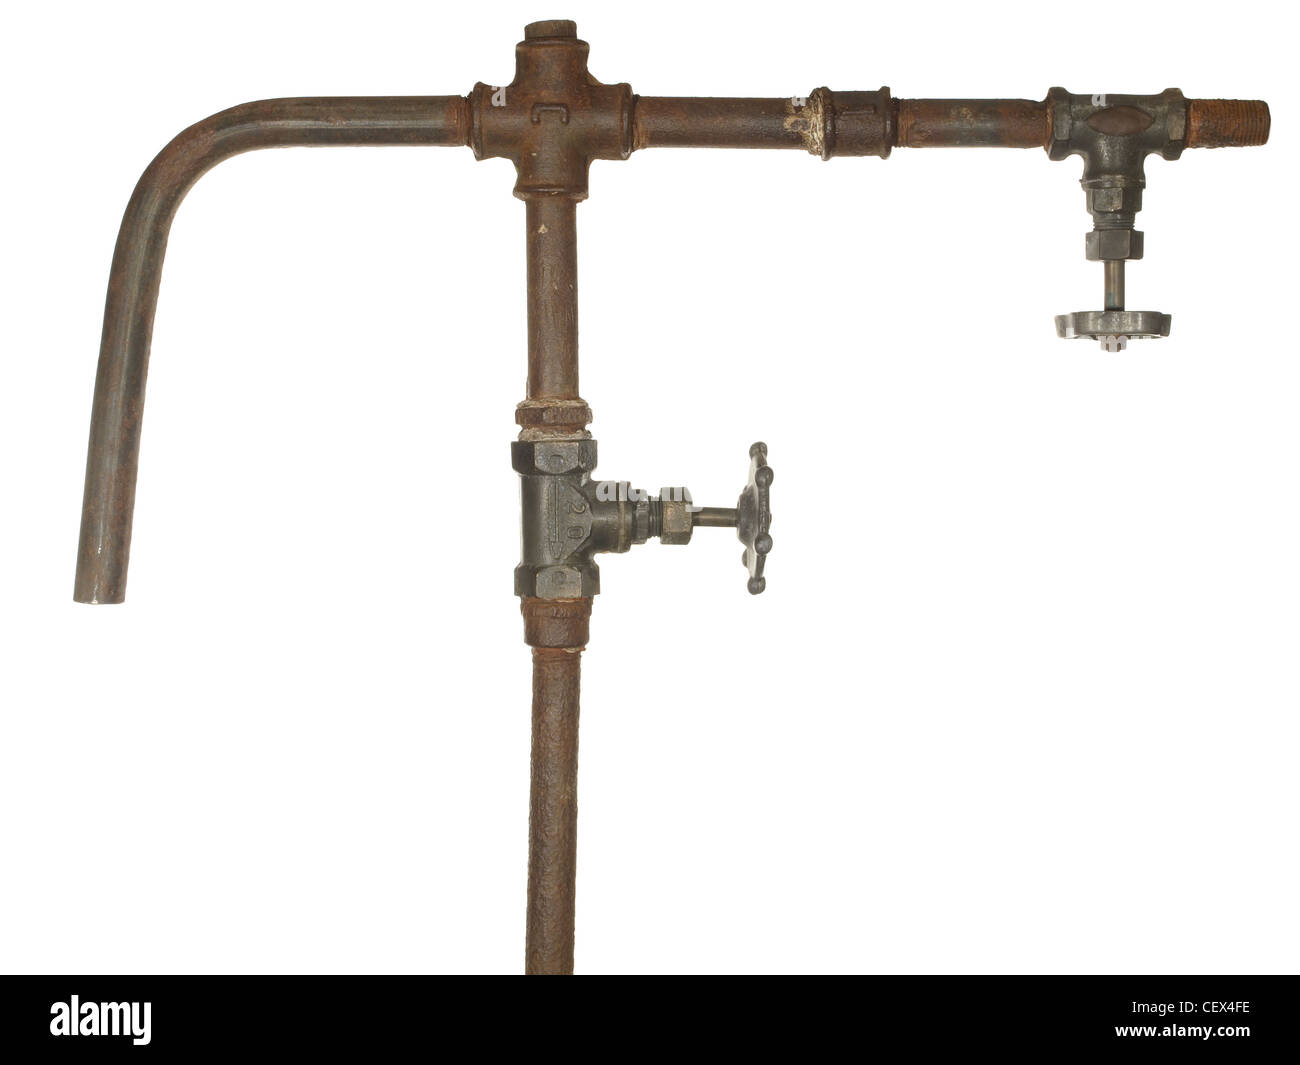 A fragment of the old water conduit consisting of pipes, fittings and valve Stock Photo